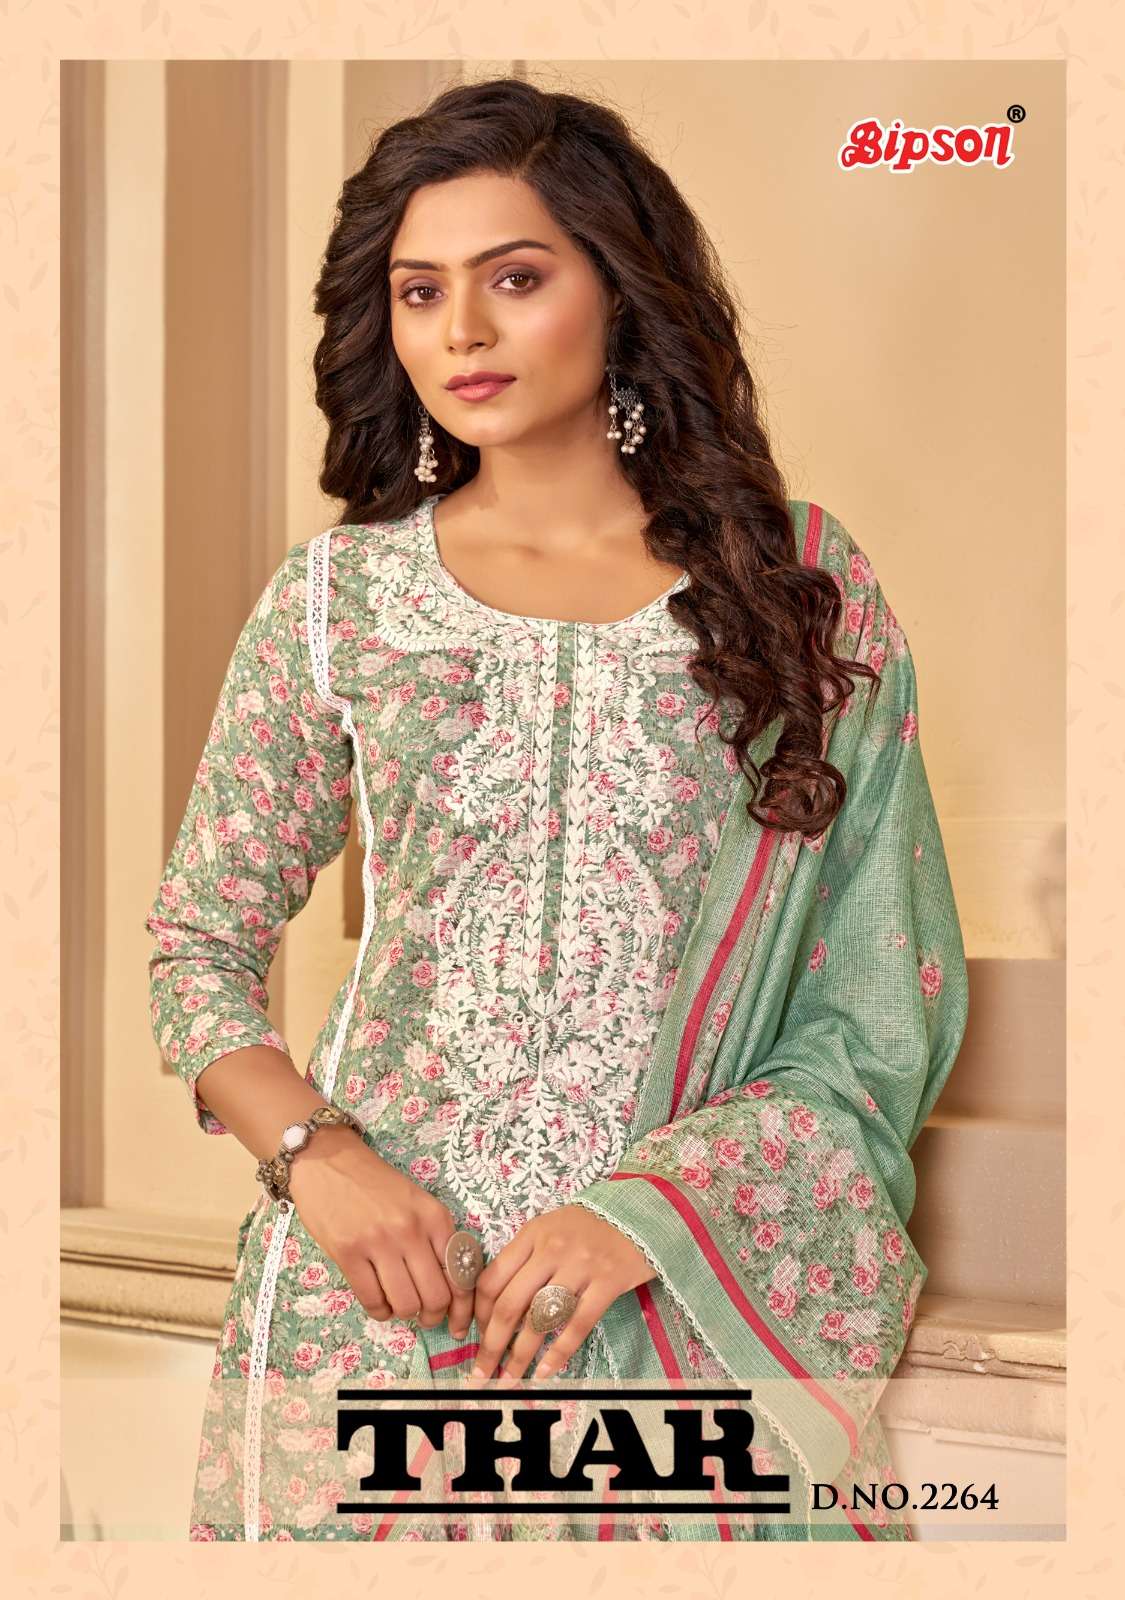 BIPSON THAR 2264 DESIGNER COTTON PRINT WITH WHITE THREAD EMBROIDERY WORK SUITS WHOLESALE 